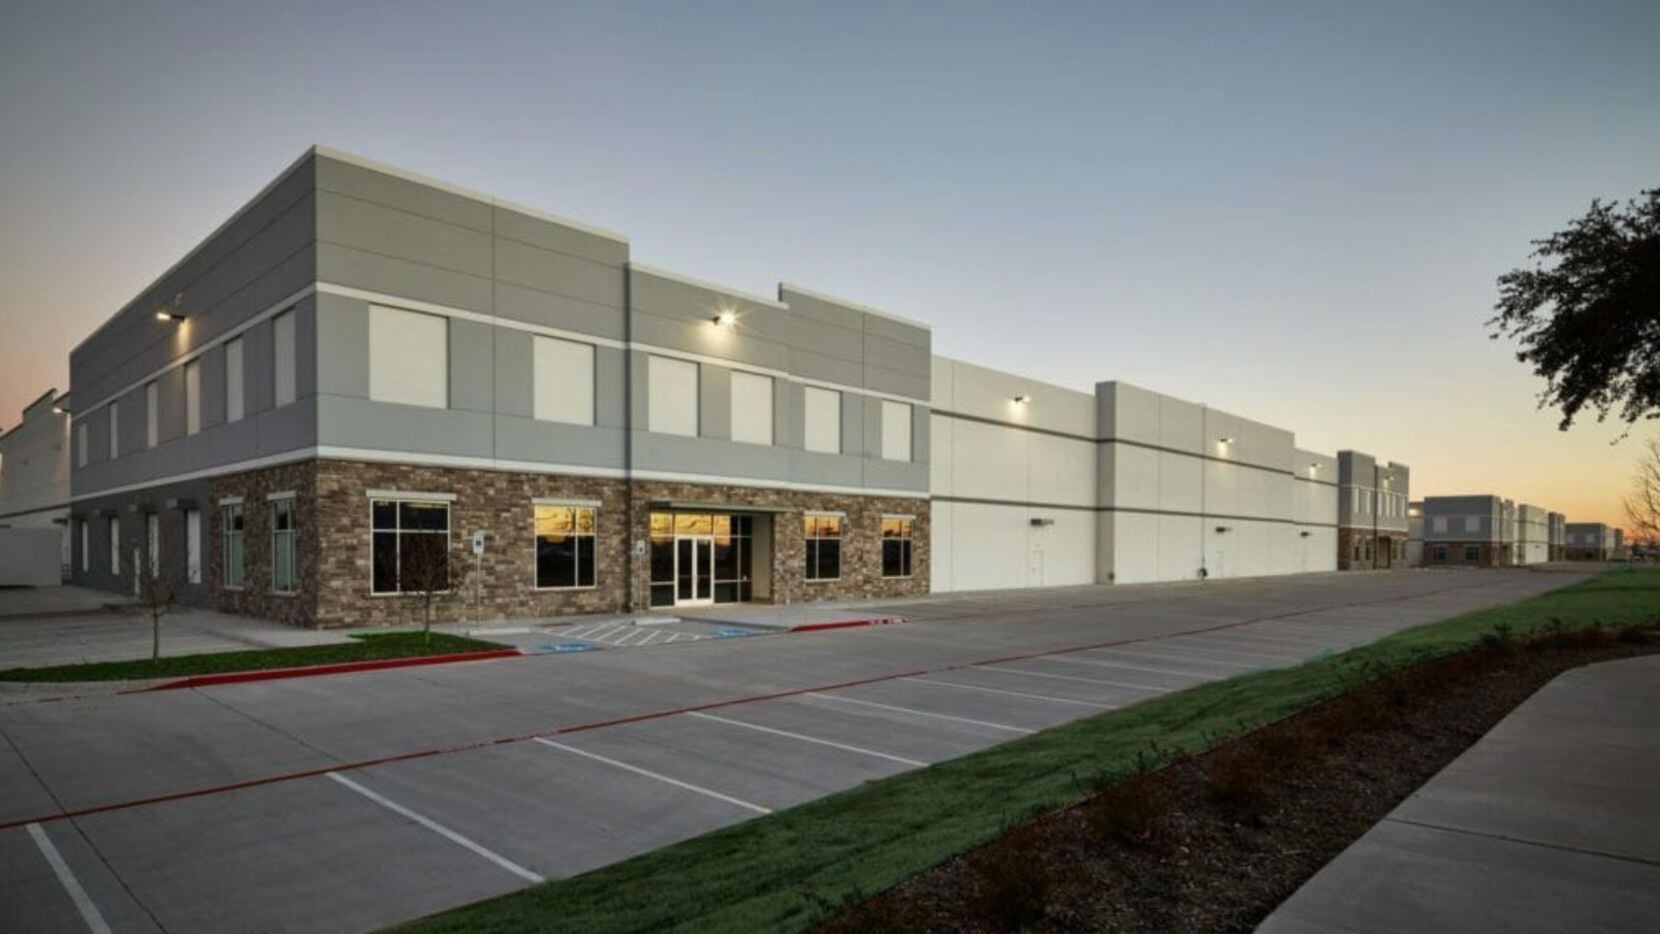 Flaherty's projects include the Jupiter Miller Business Center in Garland.